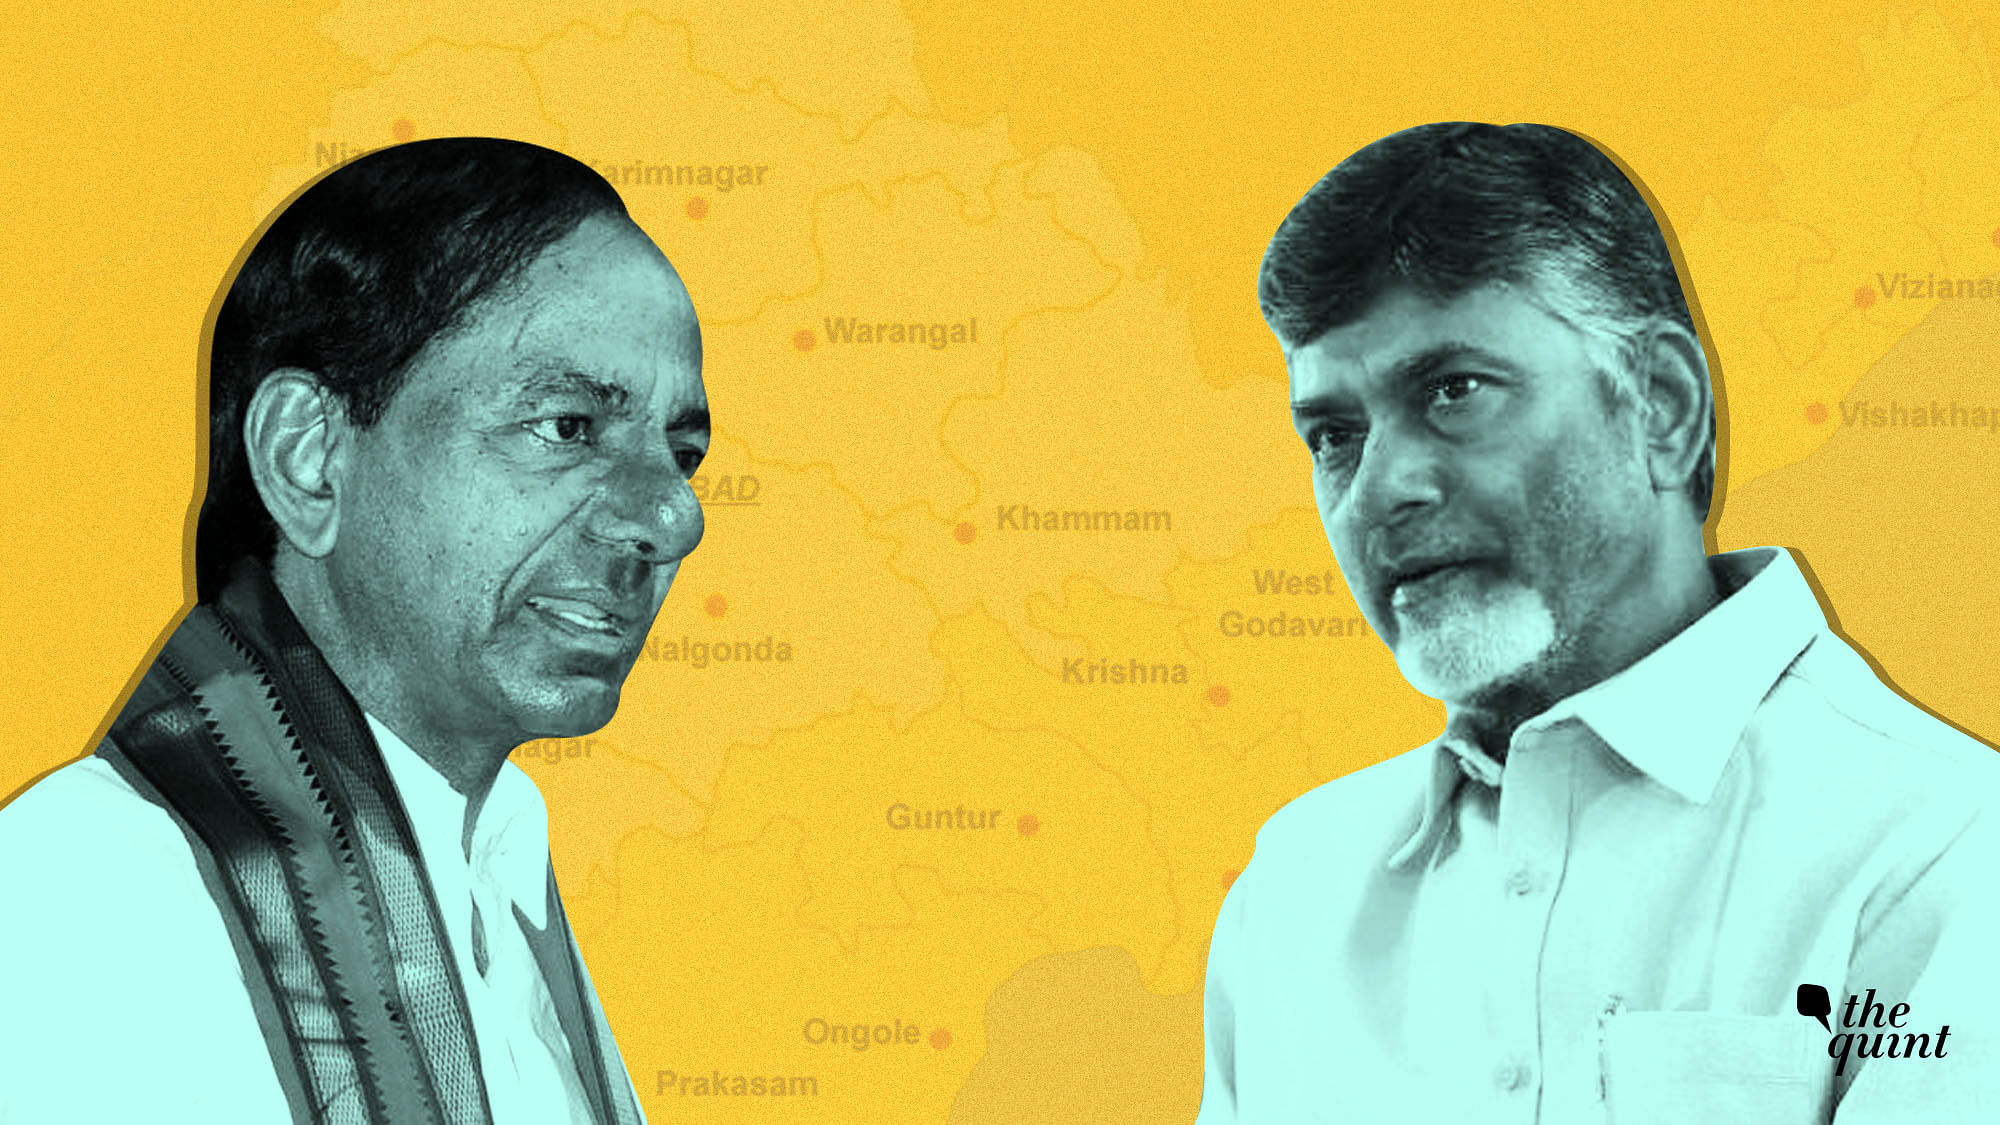 TDP has alleged that that TRS resorted to theft of TDP data to help YSRCP for the upcoming elections.